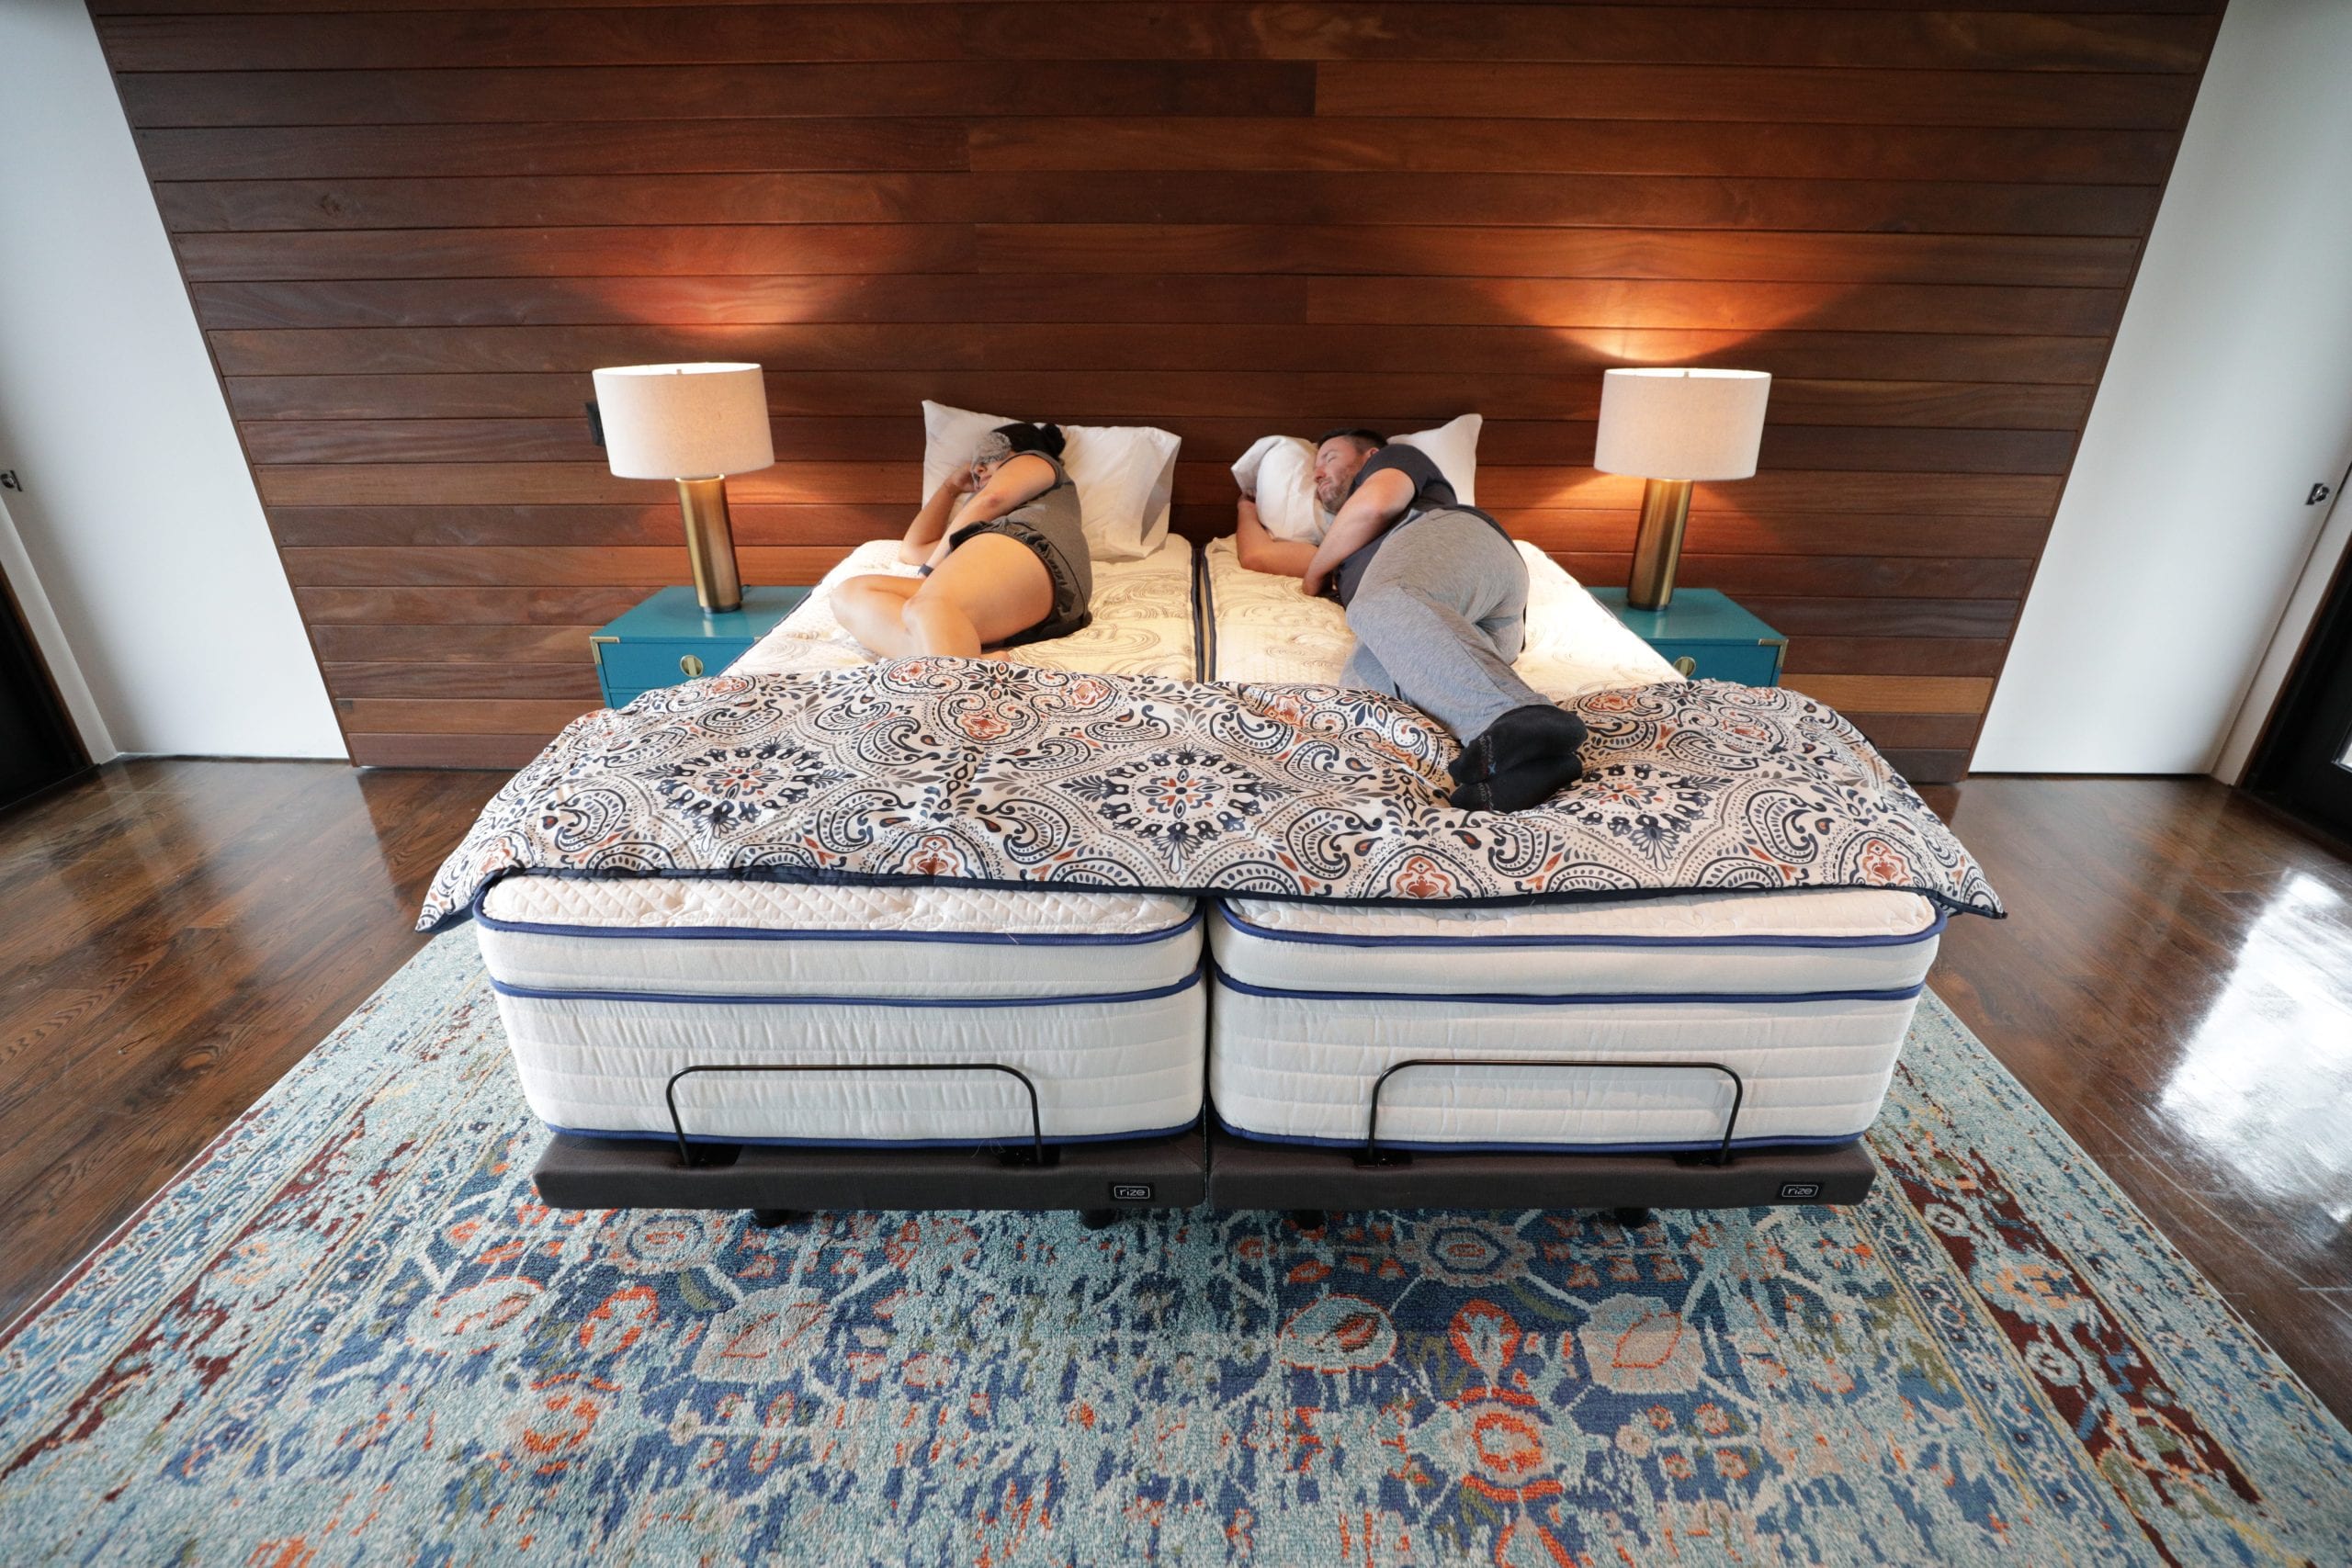 Split King Vs Bed How To Choose, Do Adjustable Beds Come In King Size